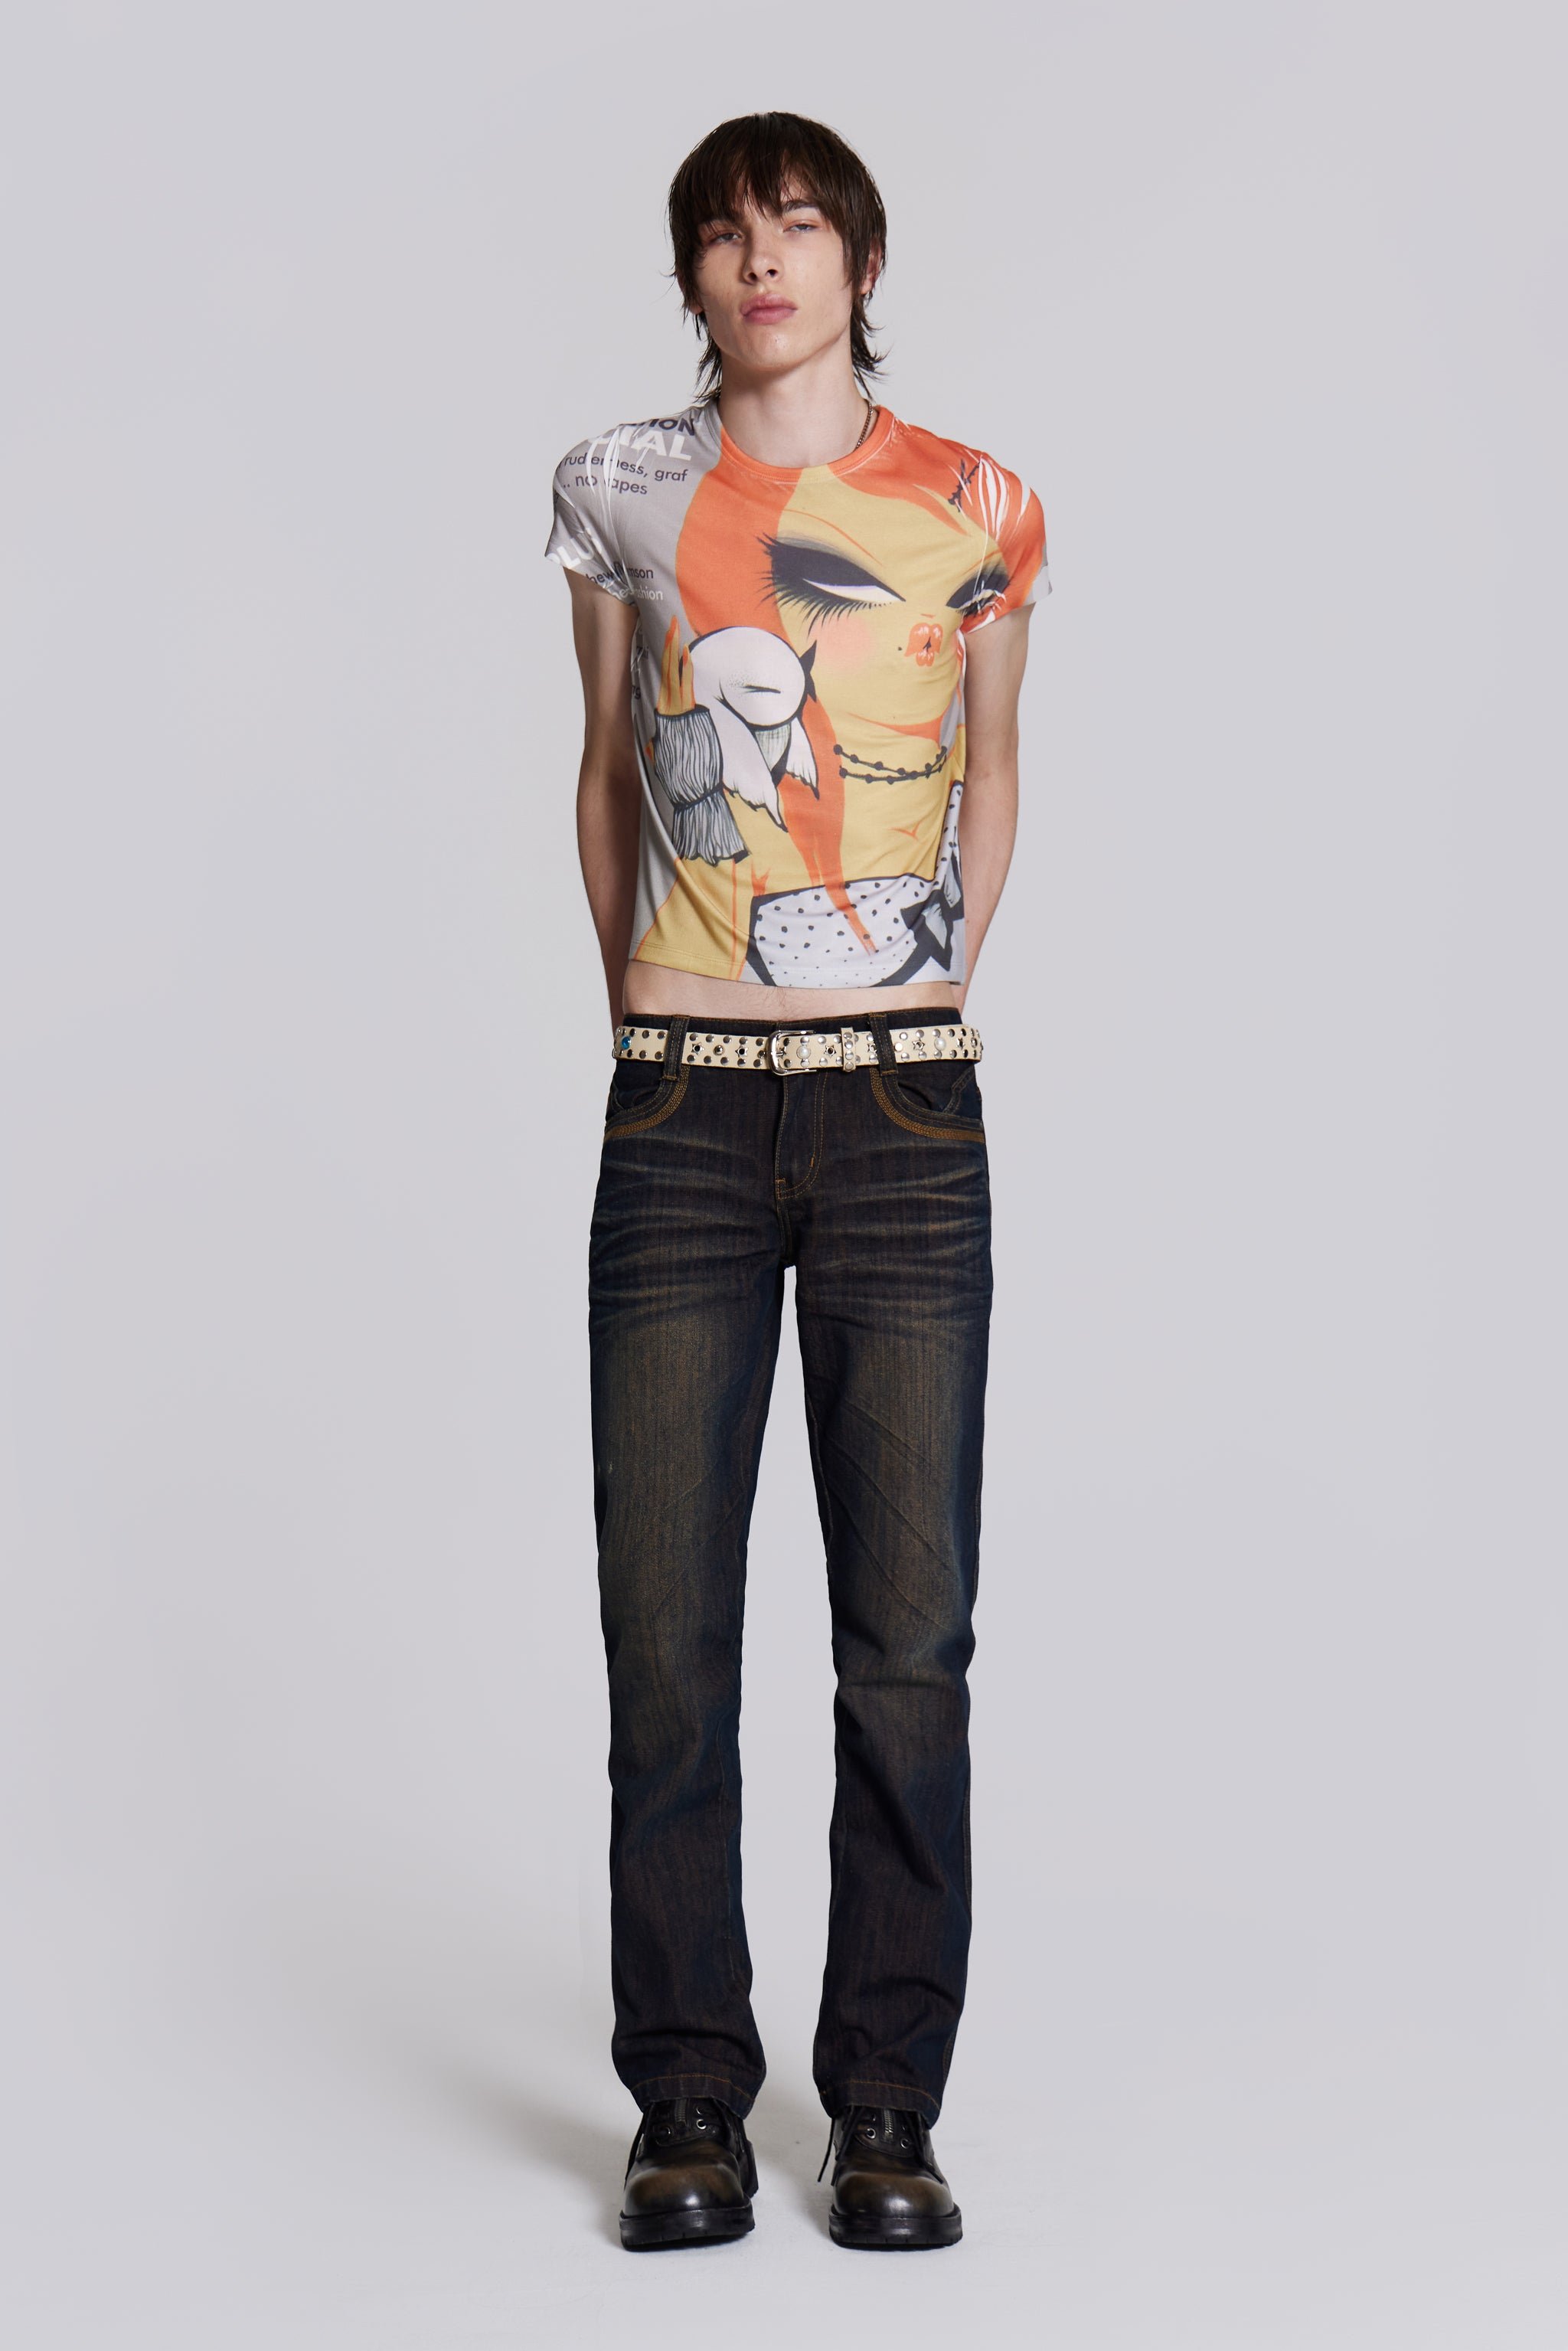 Male wearing graphic print t-shirt styled with denim jeans, studded belt and leather boots.